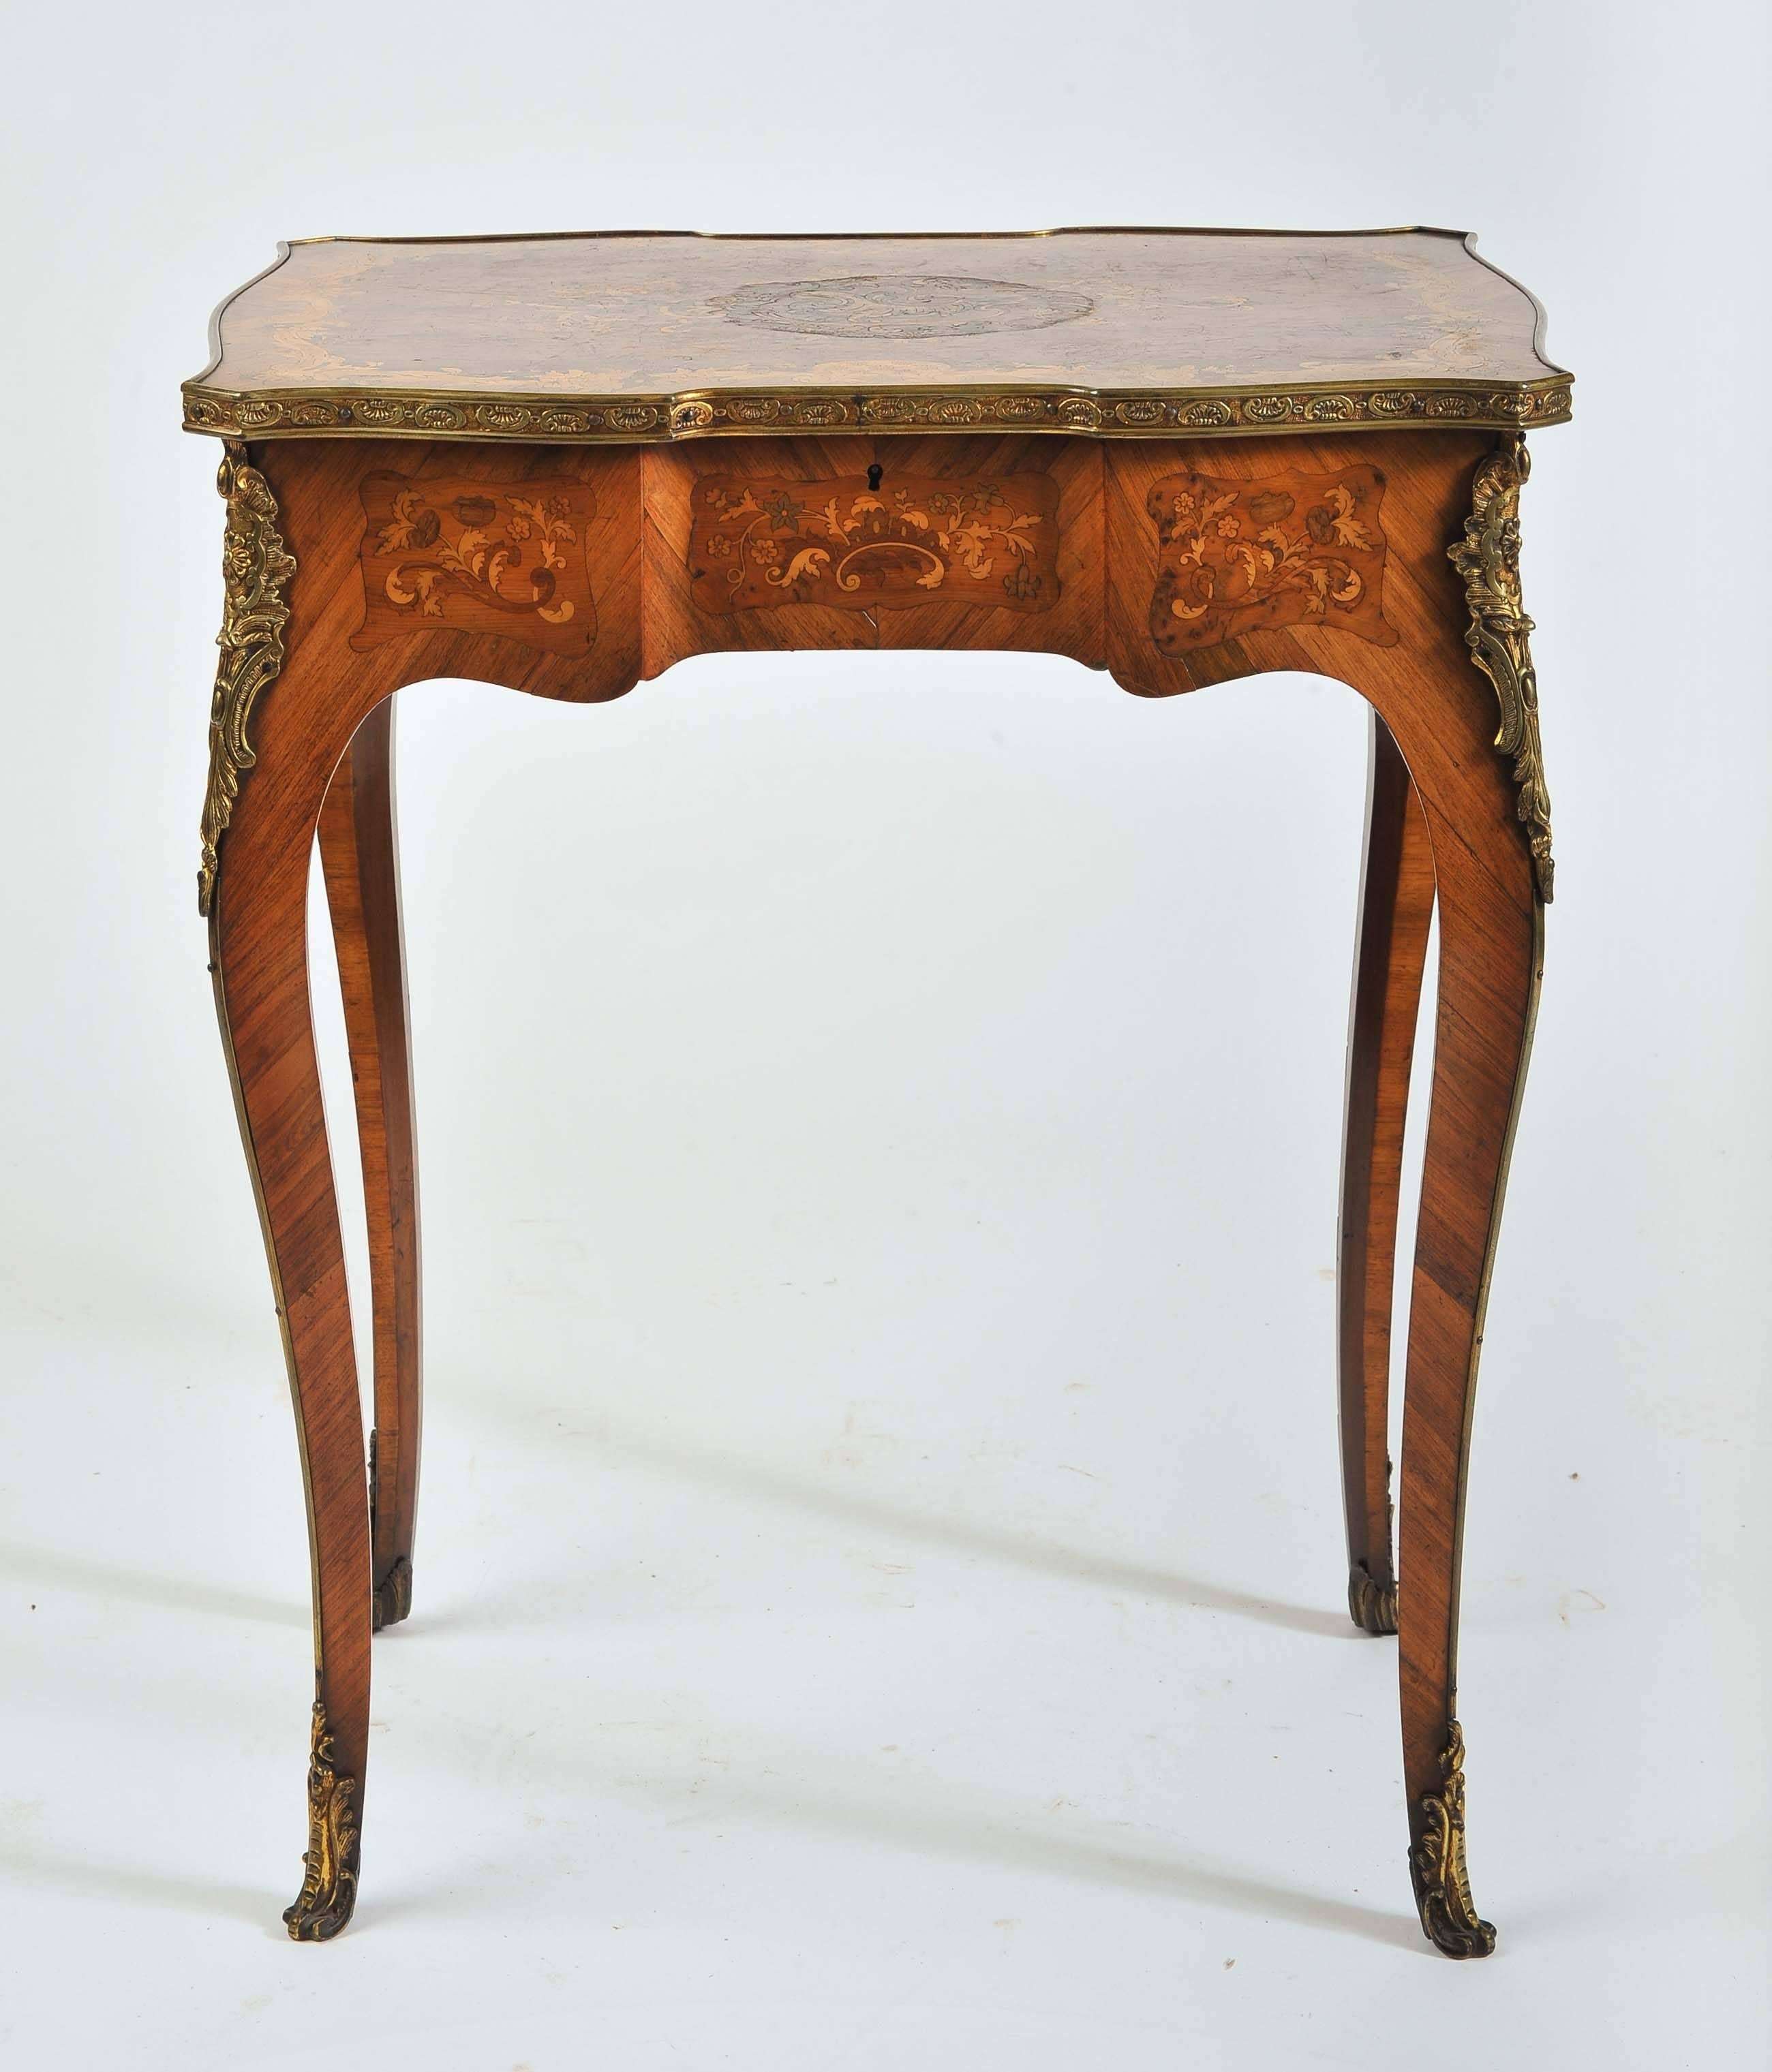 A fine quality 19th century French marquetry inlaid side table, having swag and foliate decoration, gilded ormolu mounts and raised on cabriole legs. The top hinged to reveal a storage compartment.